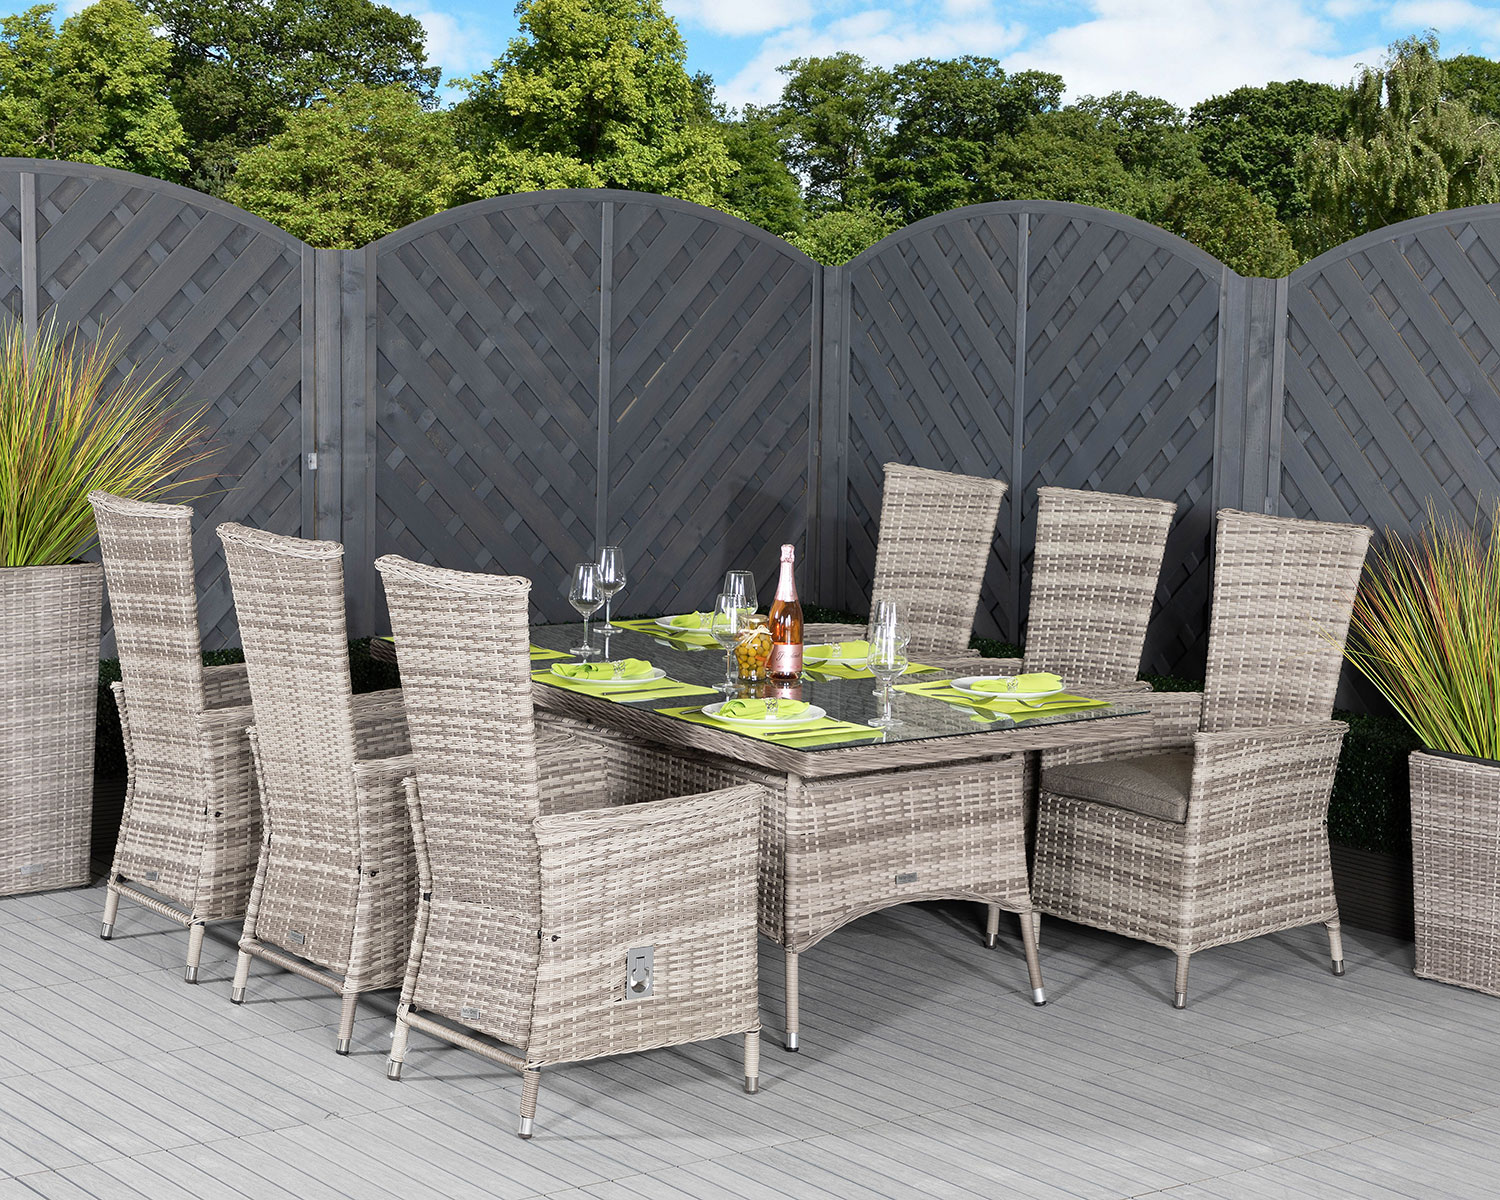 6 Seat Rattan Garden Dining Set With Large Rectangular Table In Grey With Cambridge Rattan Direct